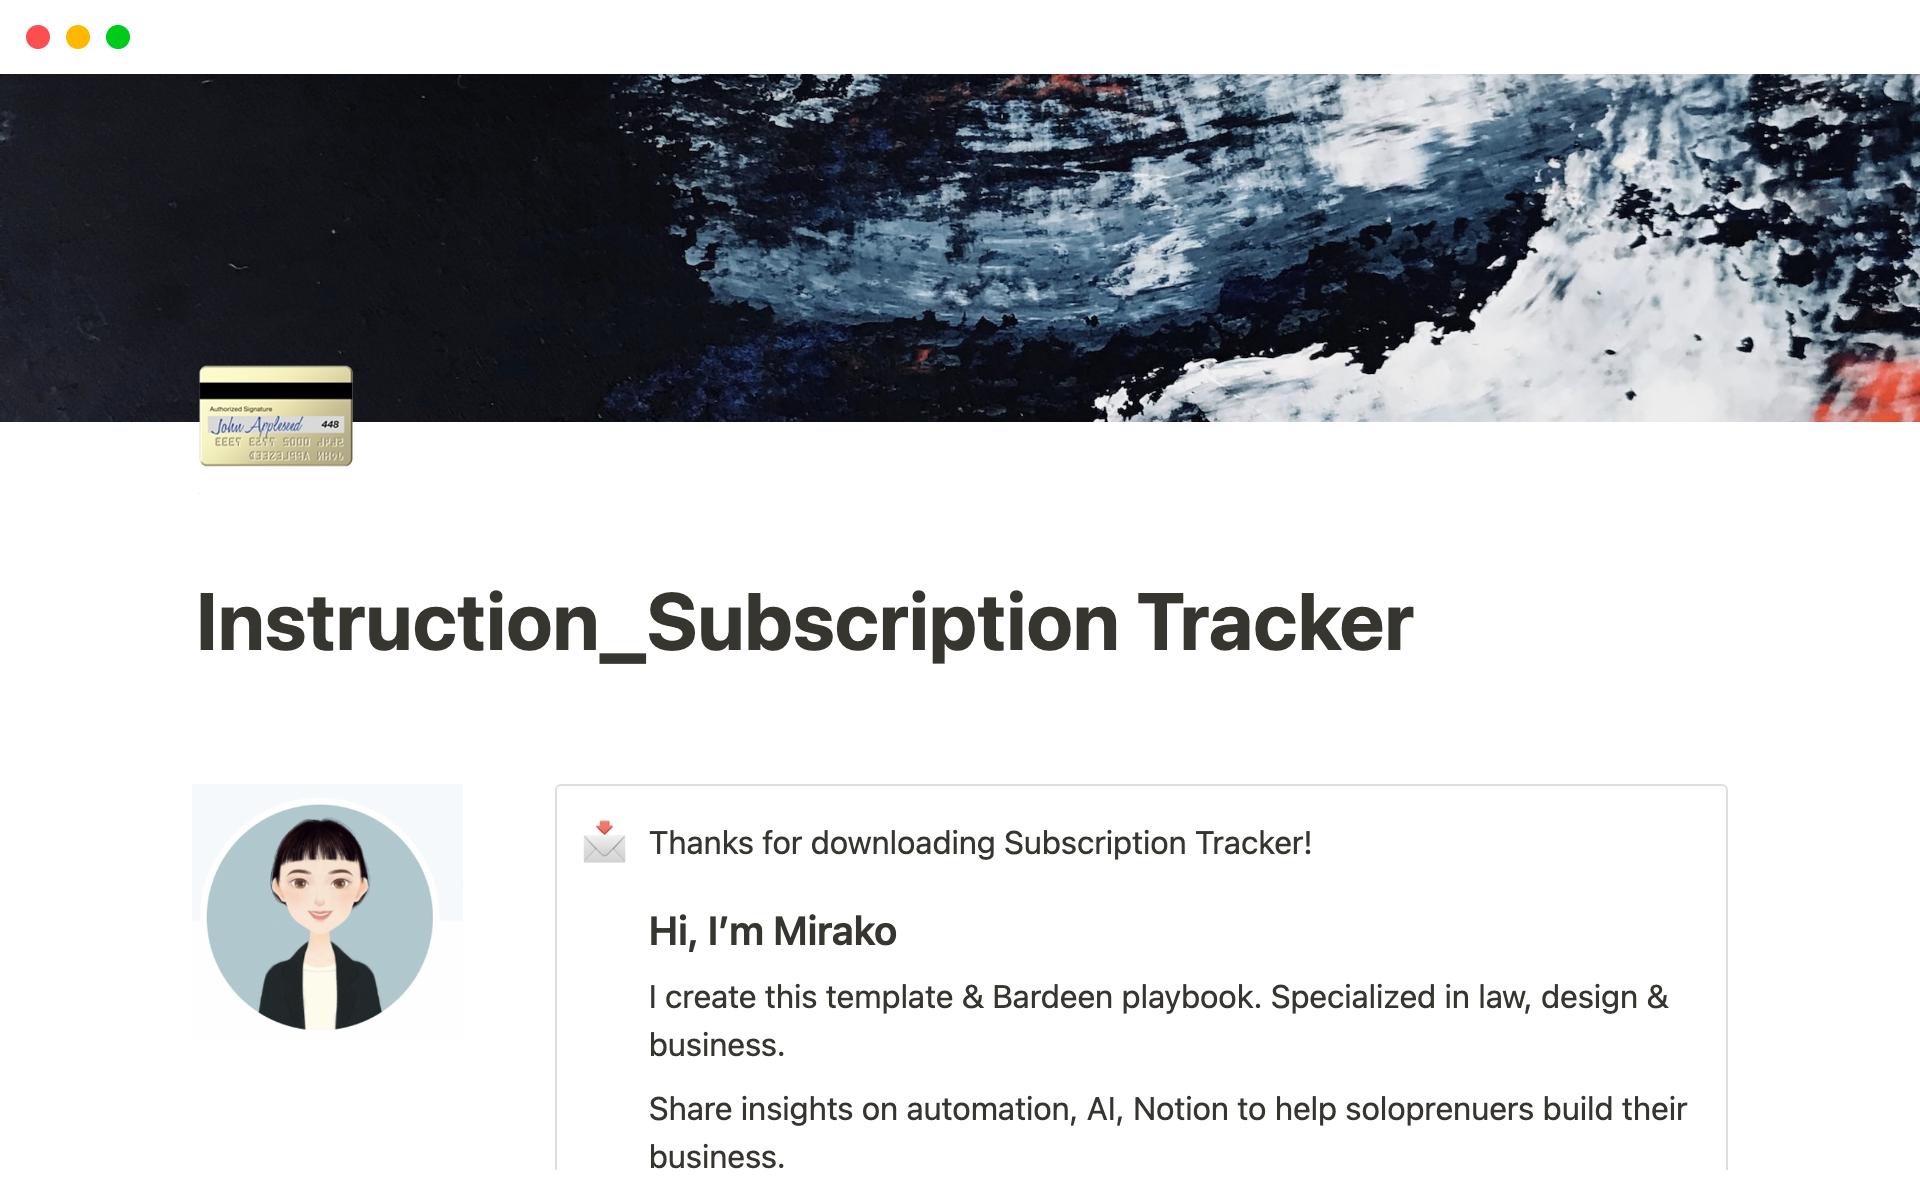 Track & manage your subscription plans